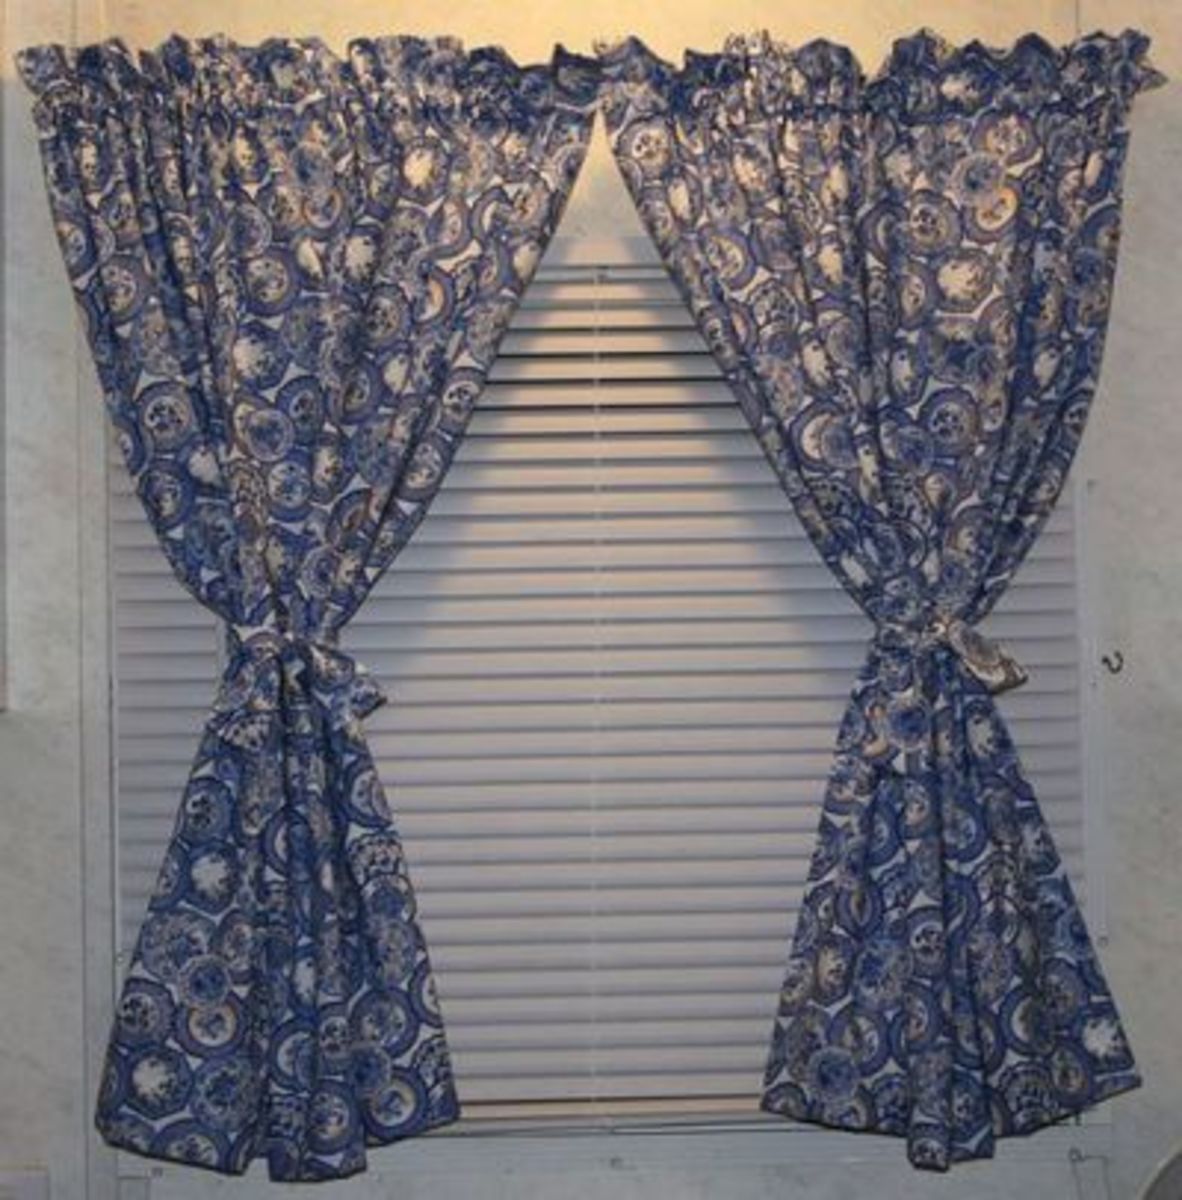 You can sew up these curtains quickly to add color and shade to your kitchen.